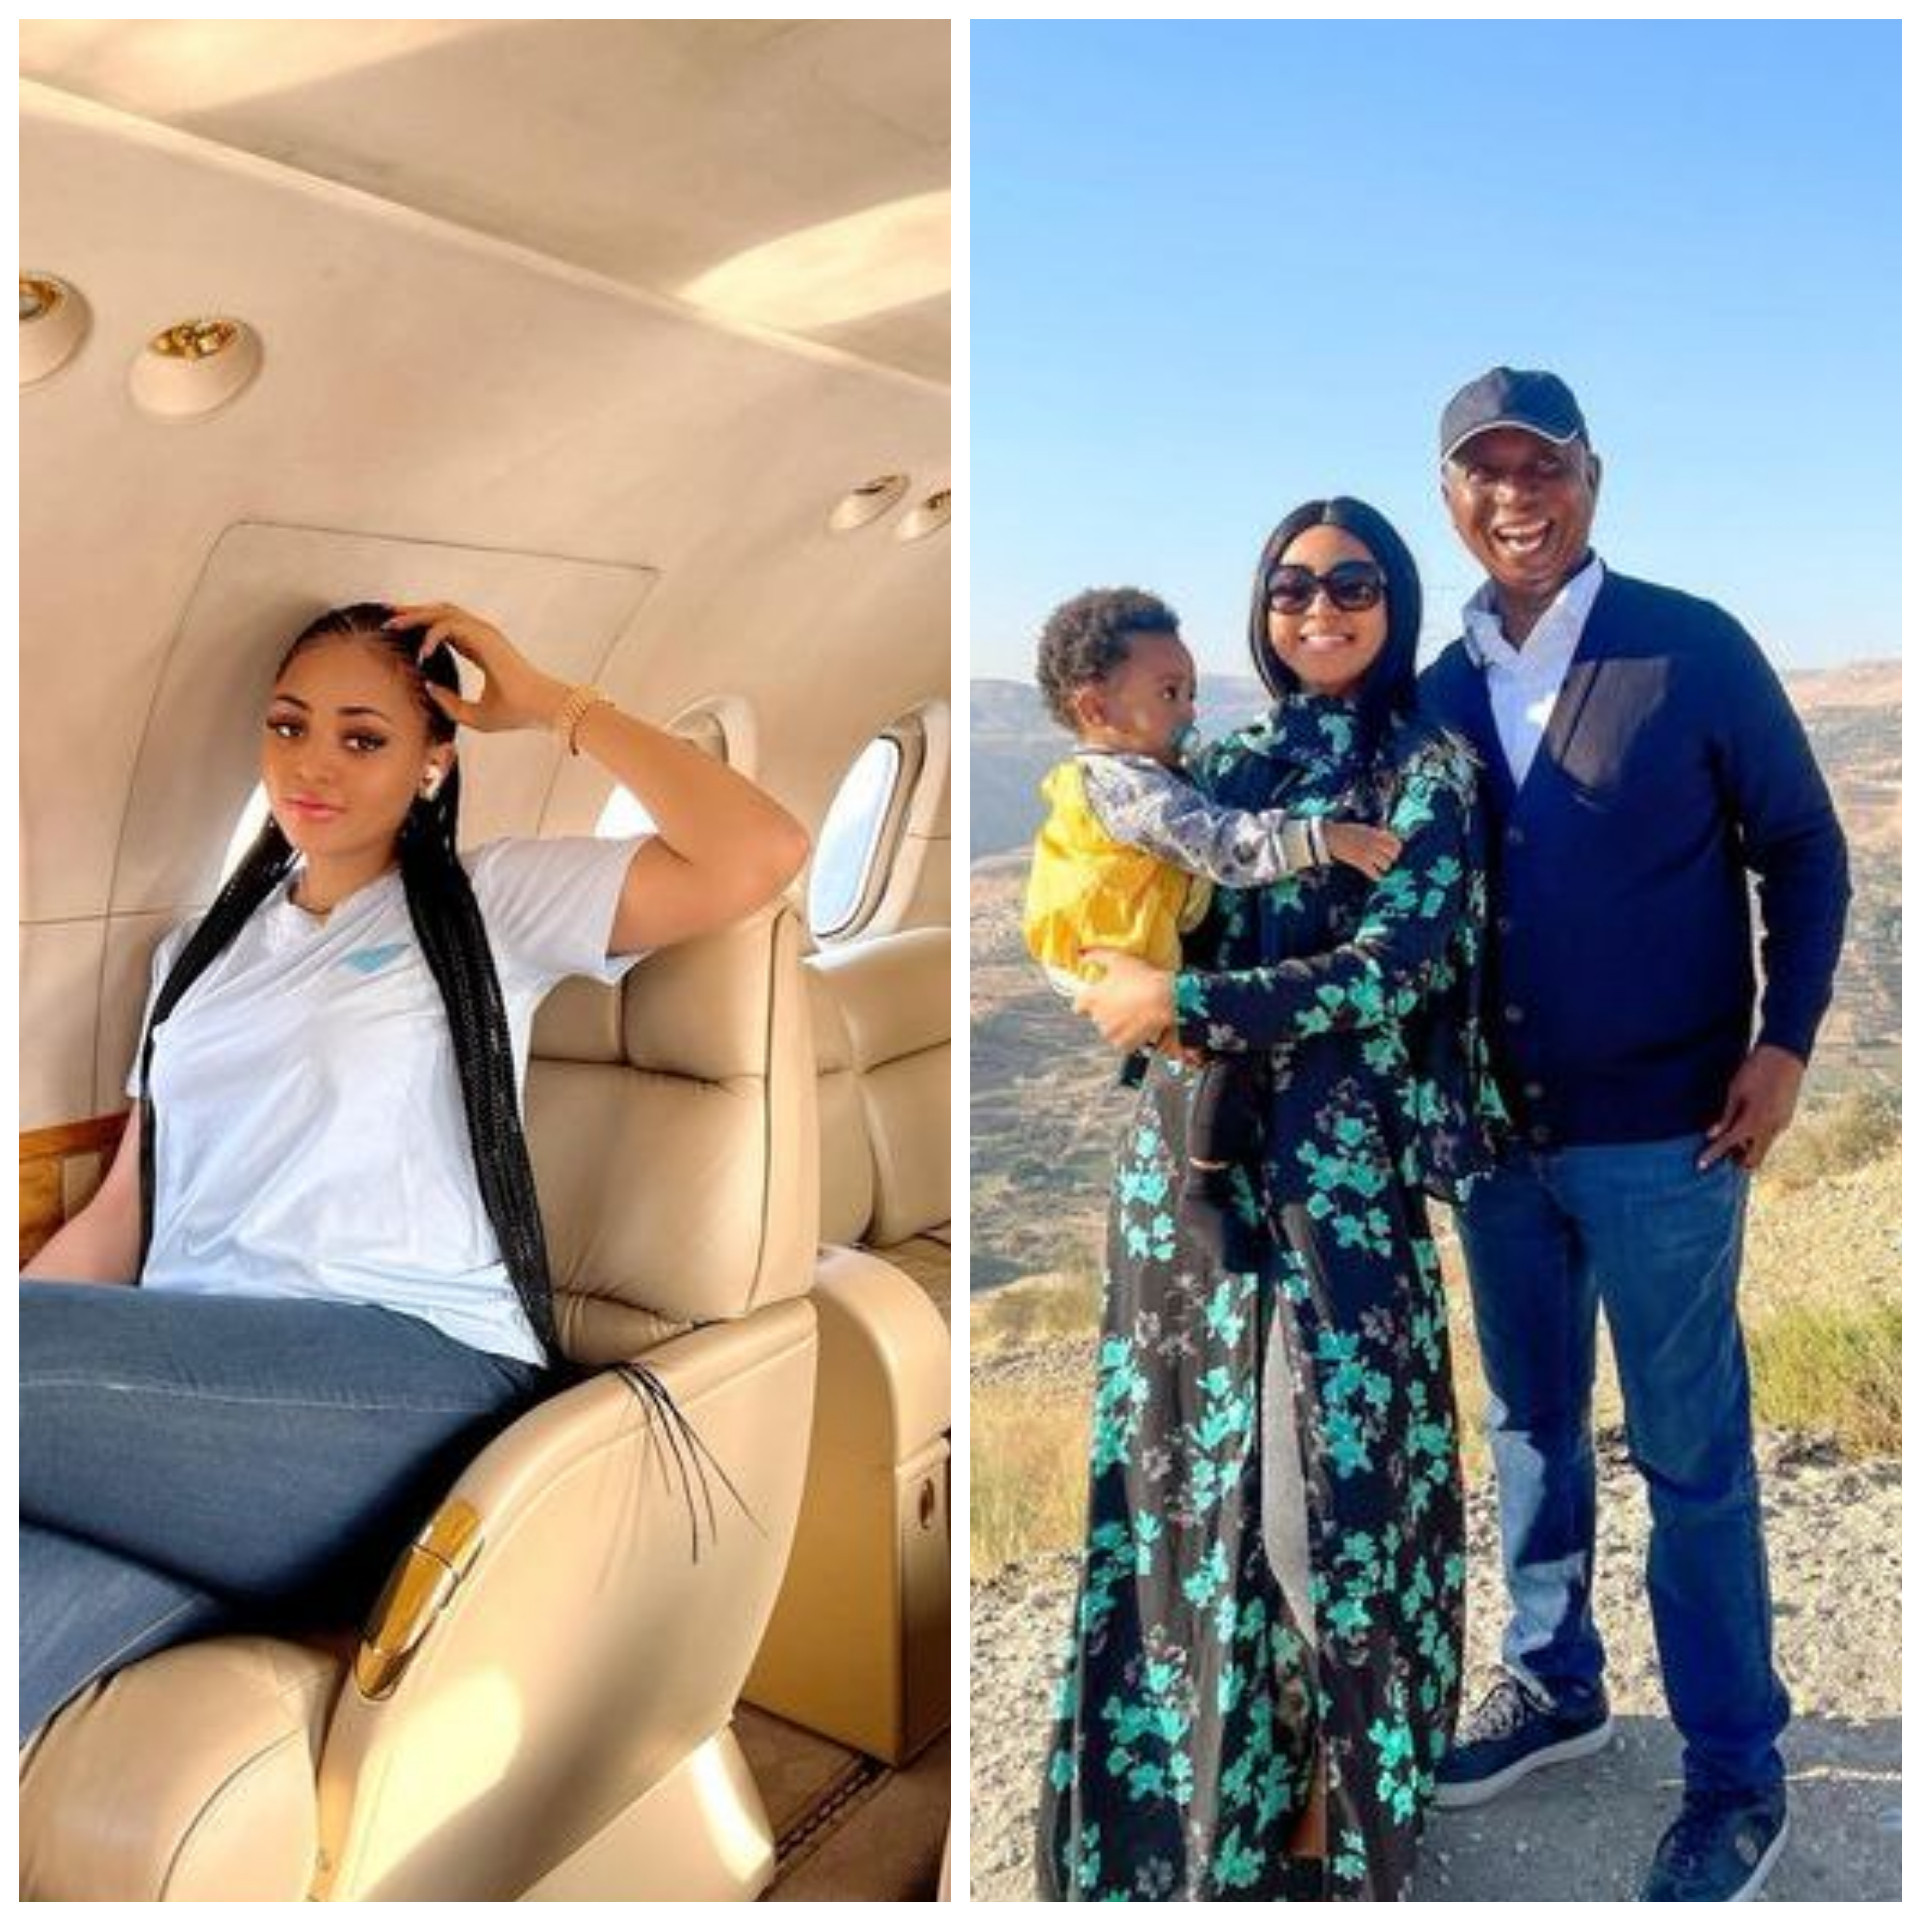 “HE ALWAYS KEEPS ME STRESS-FREE” – REGINA DANIELS SAYS HER BILLIONAIRE HUSBAND, NED NWOKO INSISTS SHE TRAVELS ON PRIVATE JET